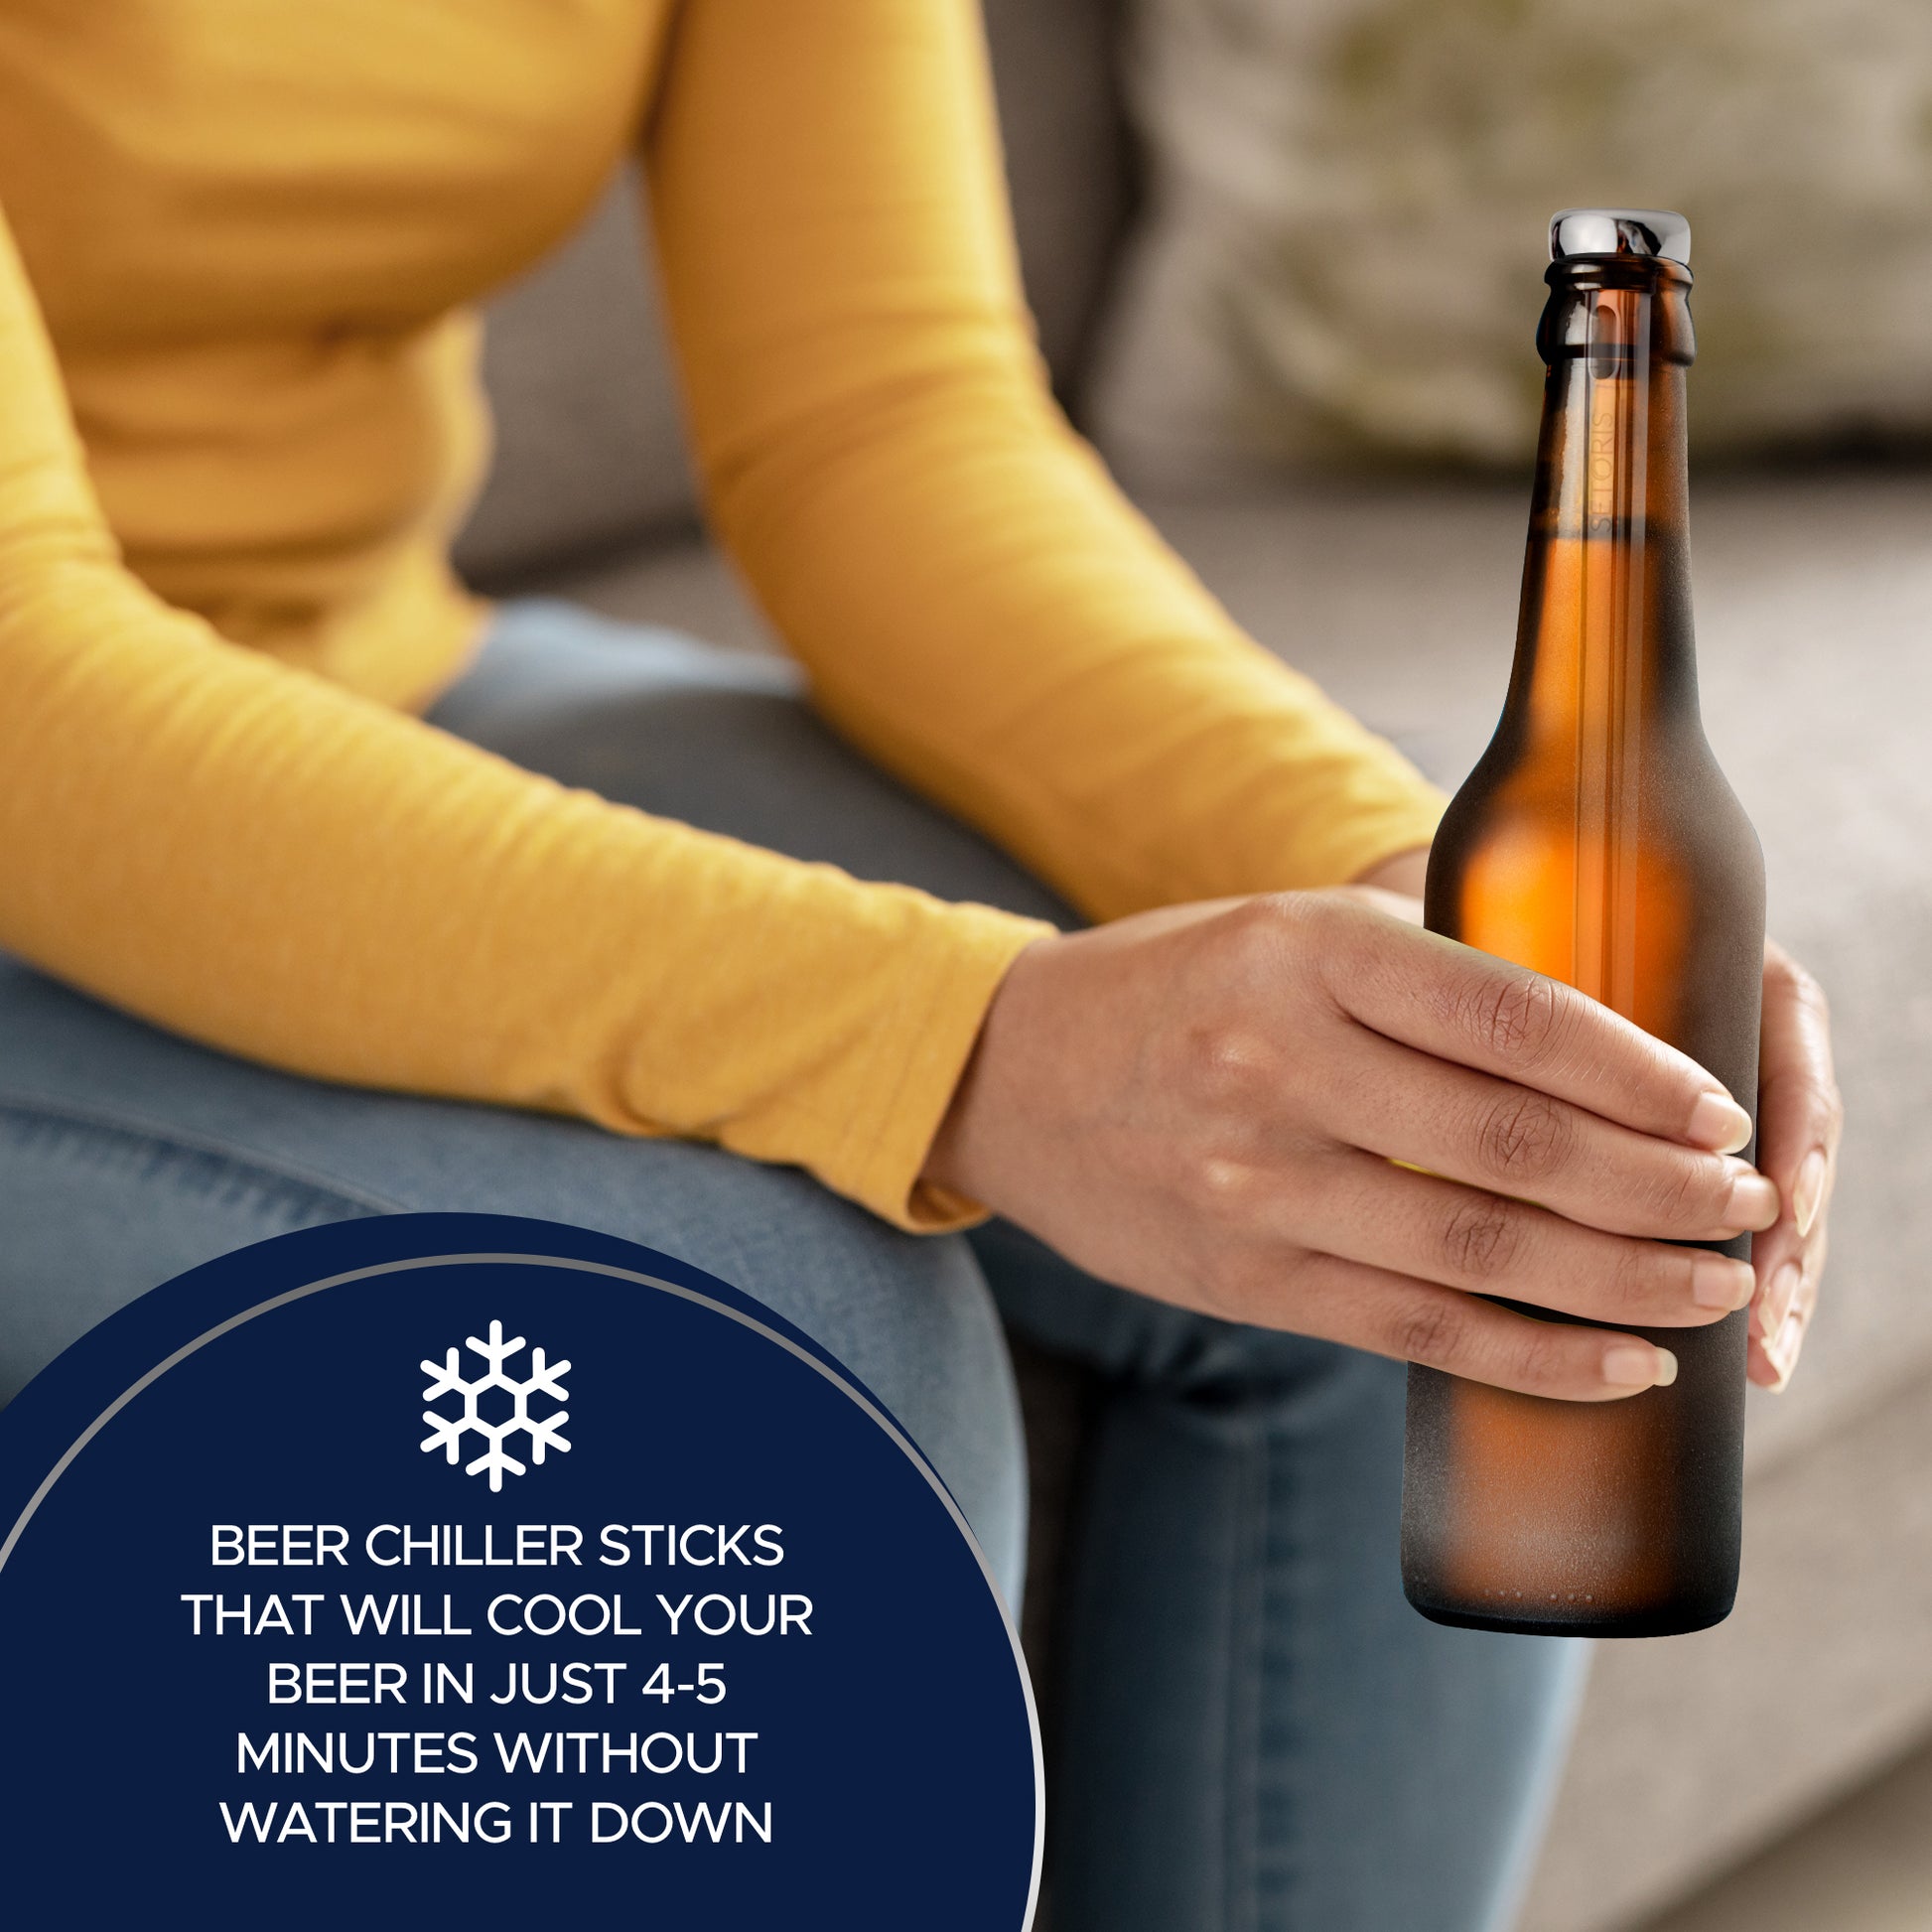 Does A Chiller Stick Keep Your Beer Cooler? 